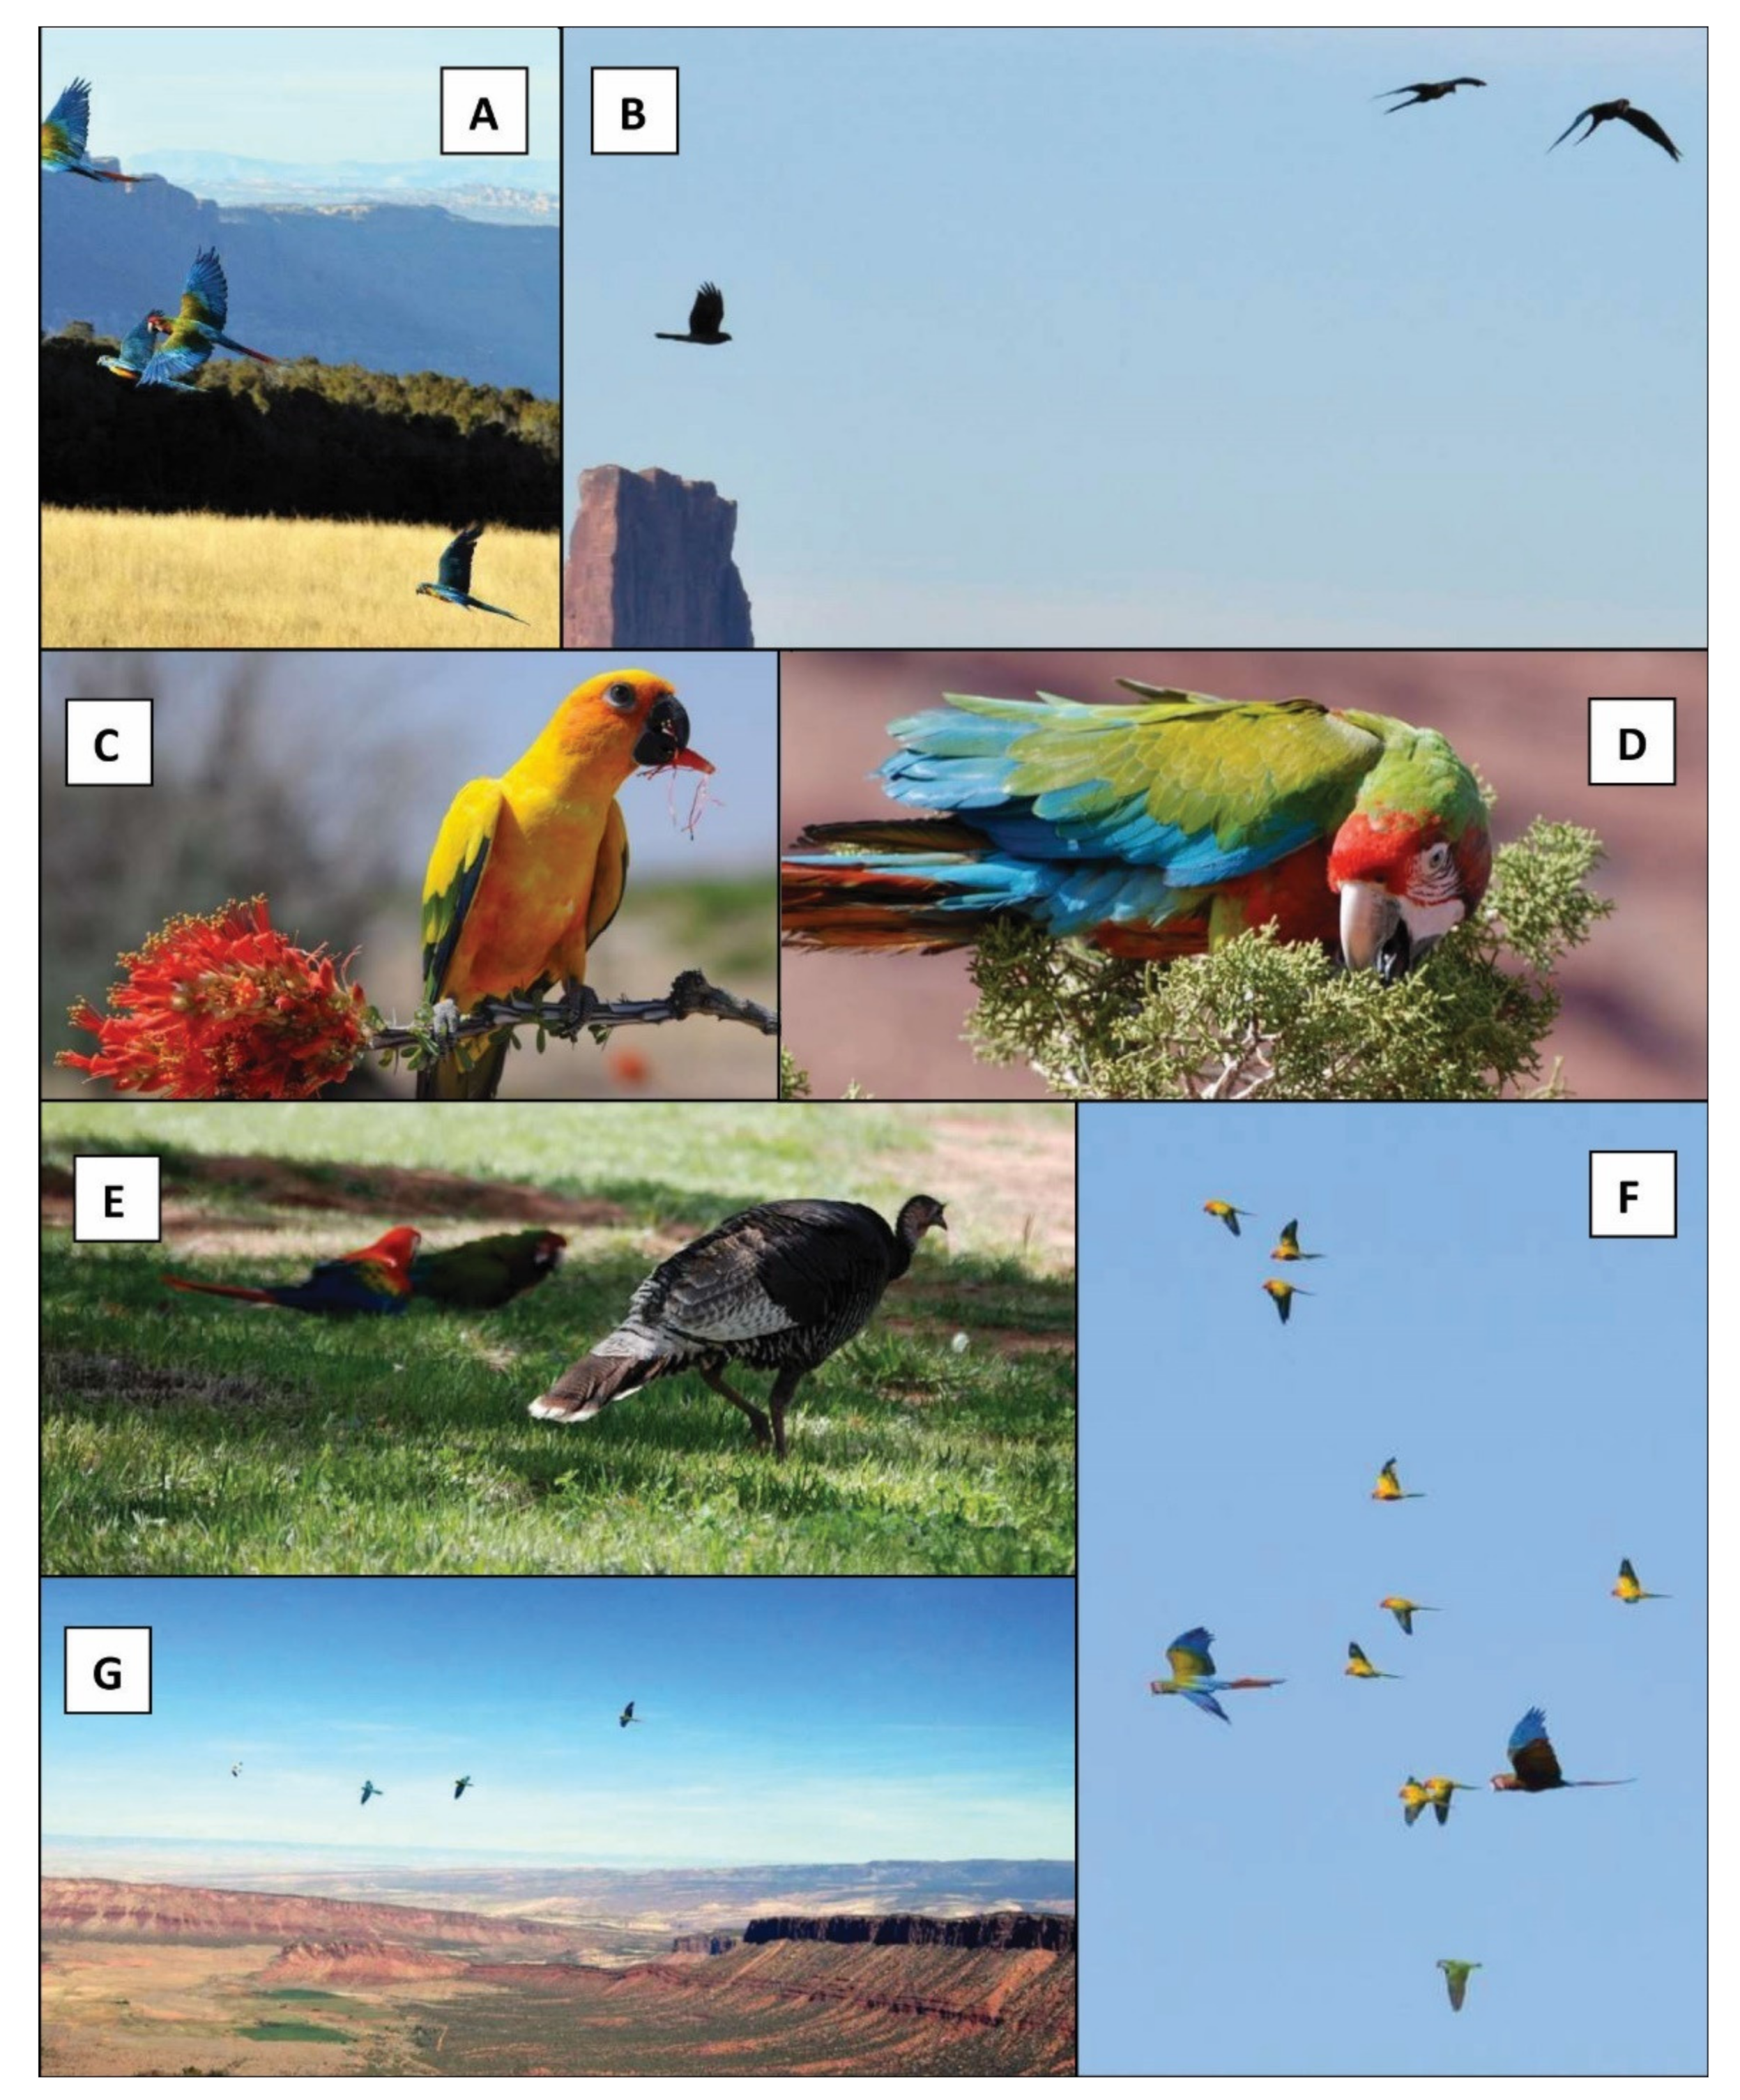 Diversity | Free Full-Text | Parrot Free-Flight as a Conservation Tool